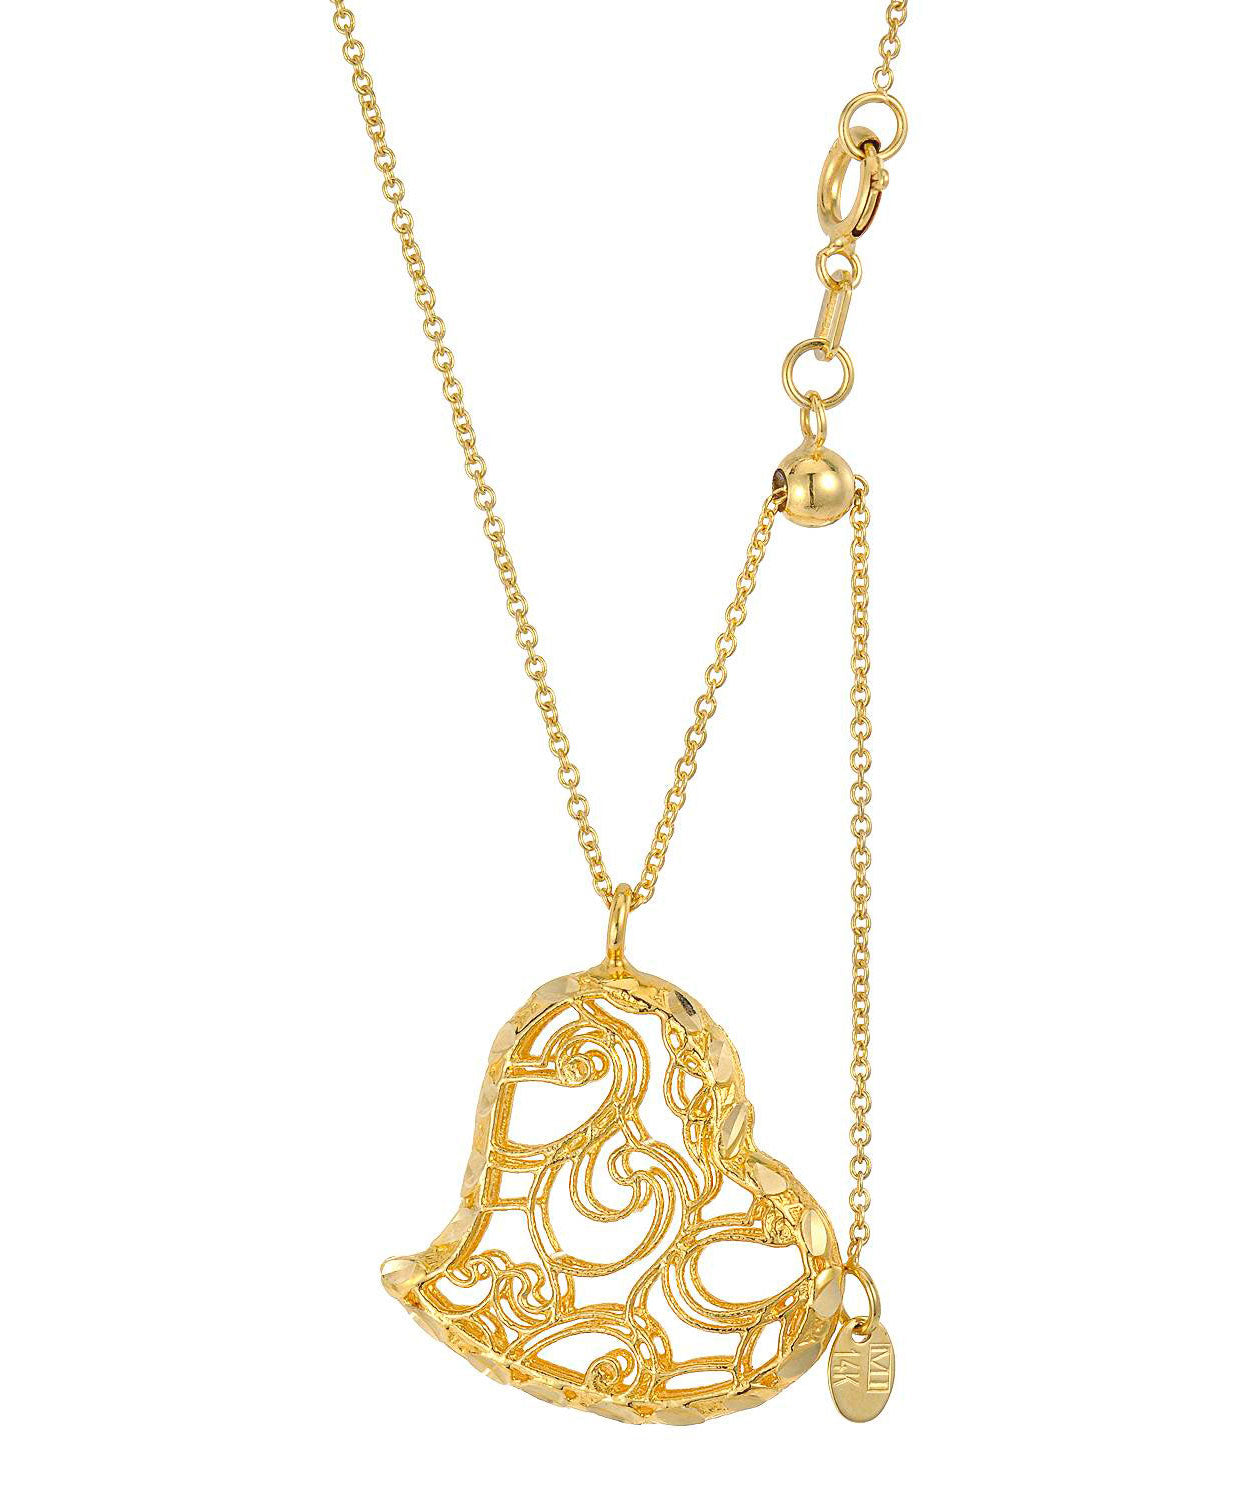 Patterns of Love Collection 14k Gold Heart Pendant With Adjustable Chain - Made in Italy View 2